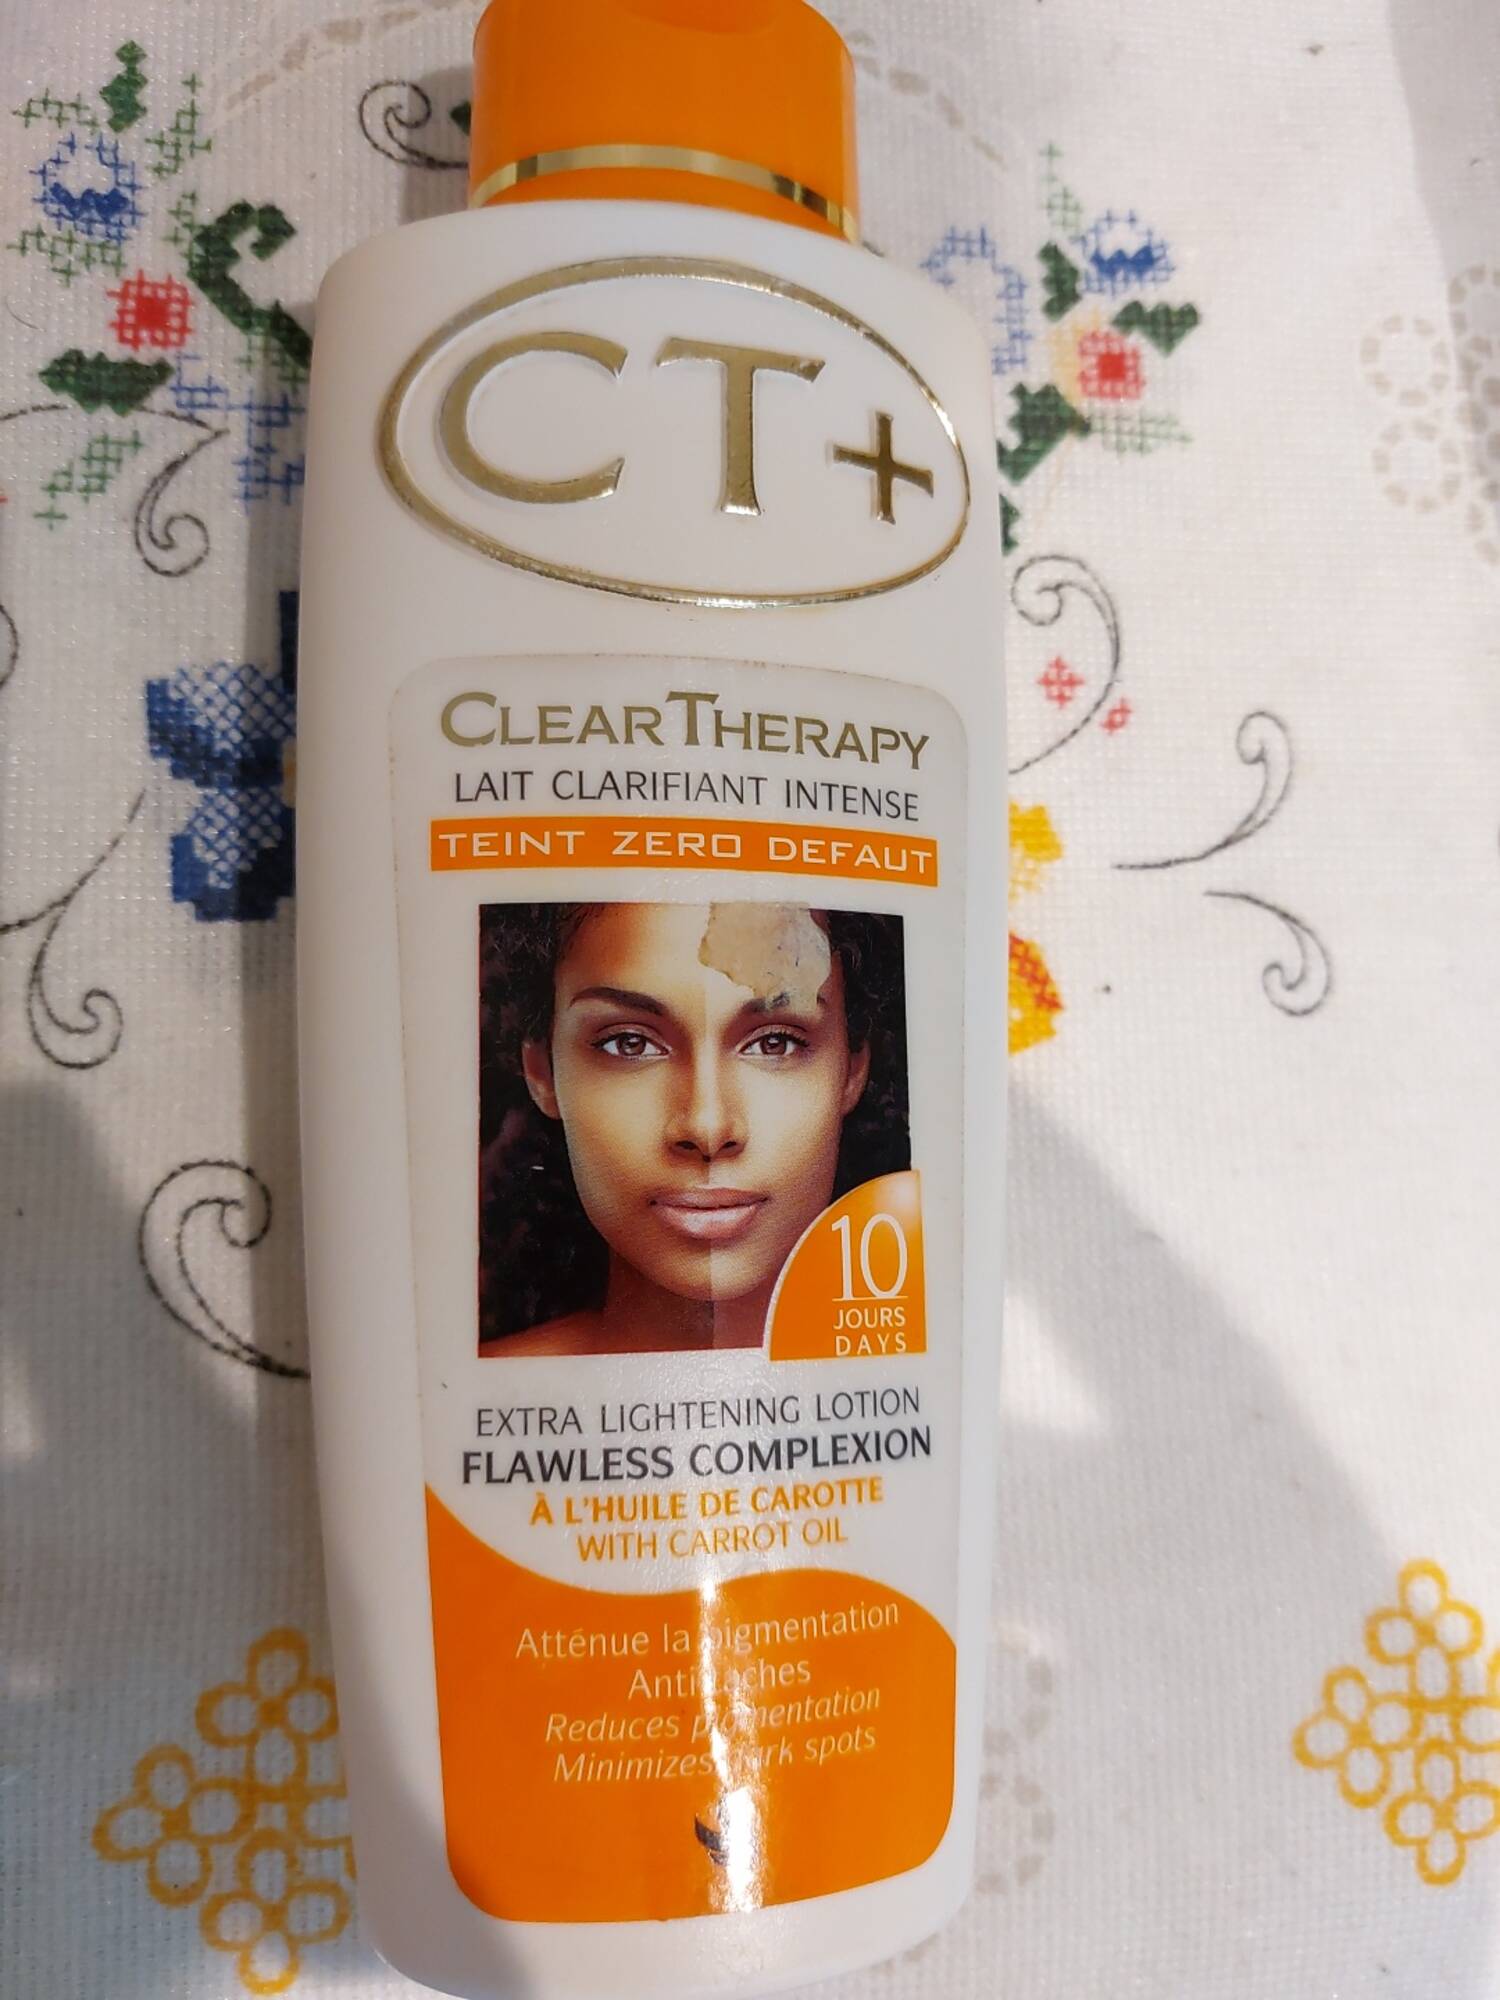 DREAM COSMETICS - Clear therapy - Lait clarifiant intense